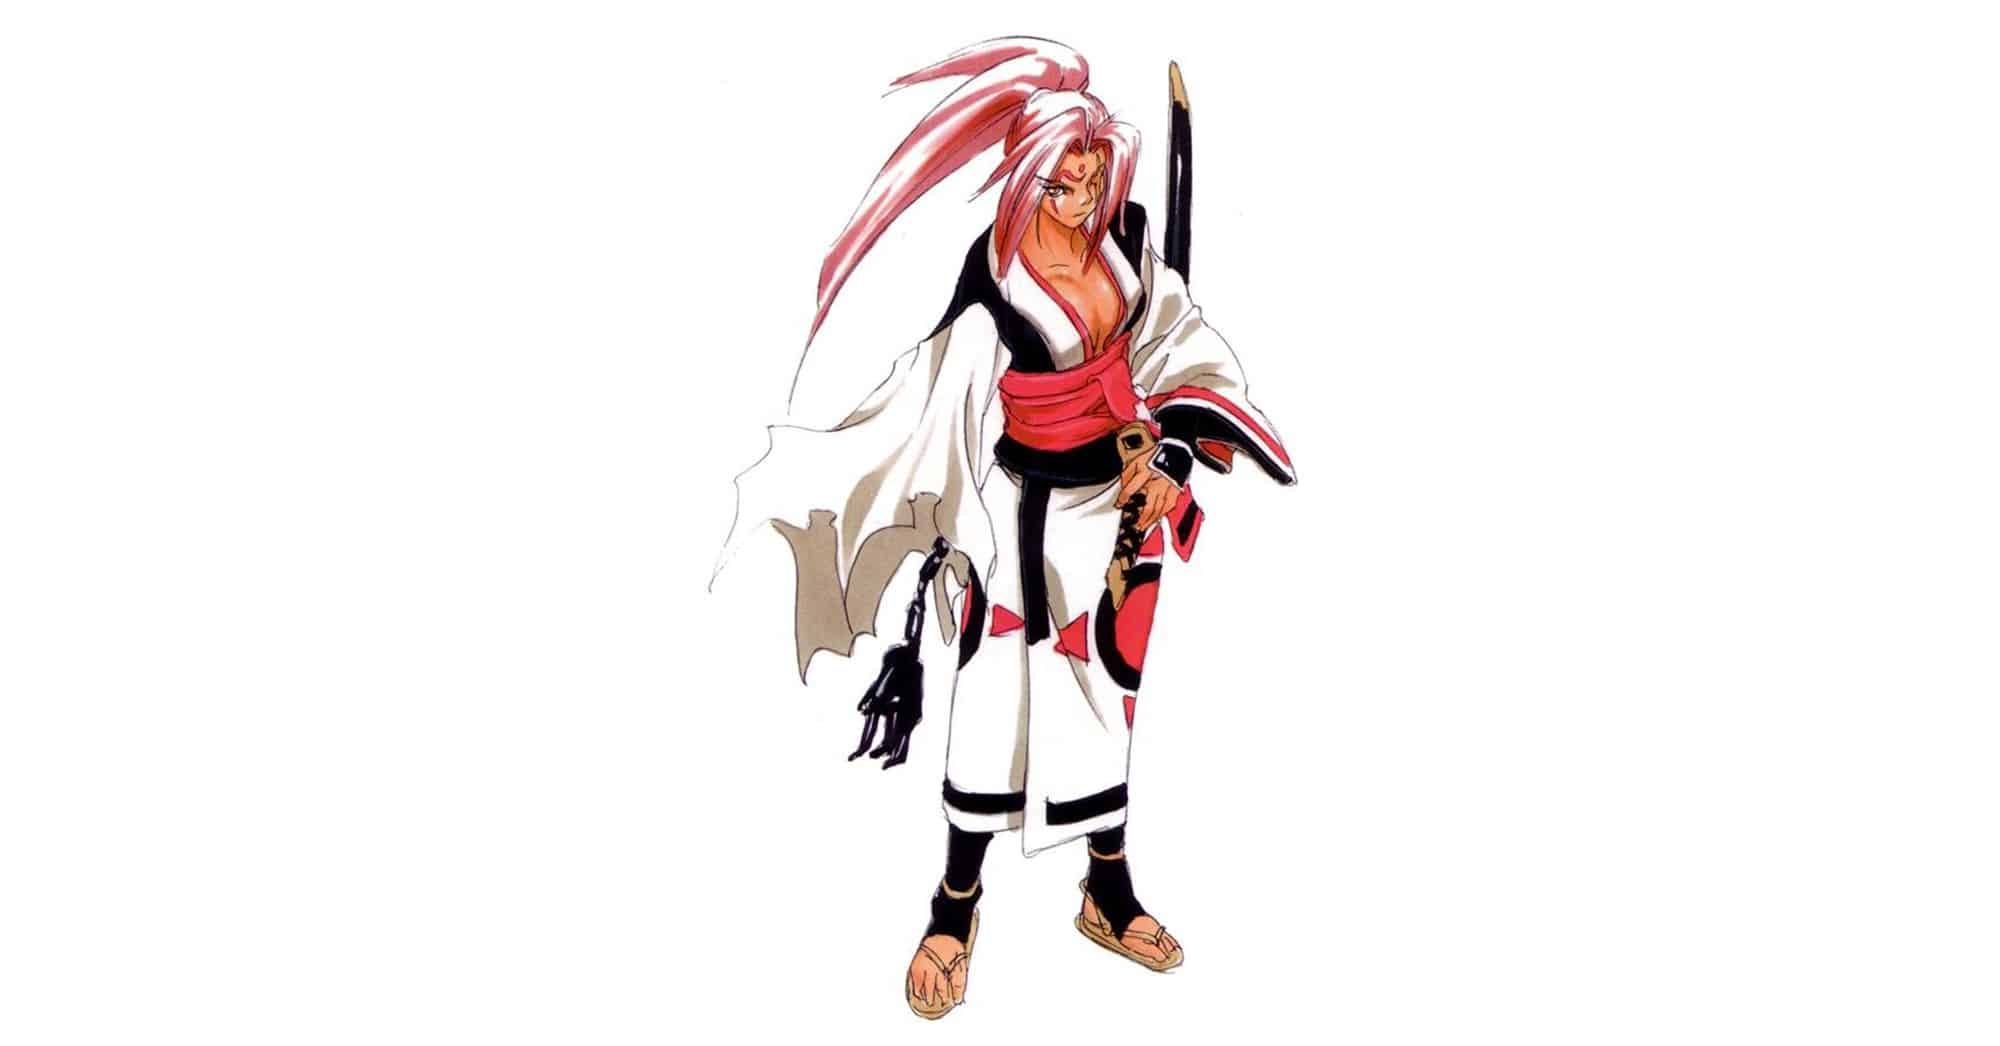 Guilty gear strive/moves — strategywiki, the video game walkthrough and strategy guide wiki